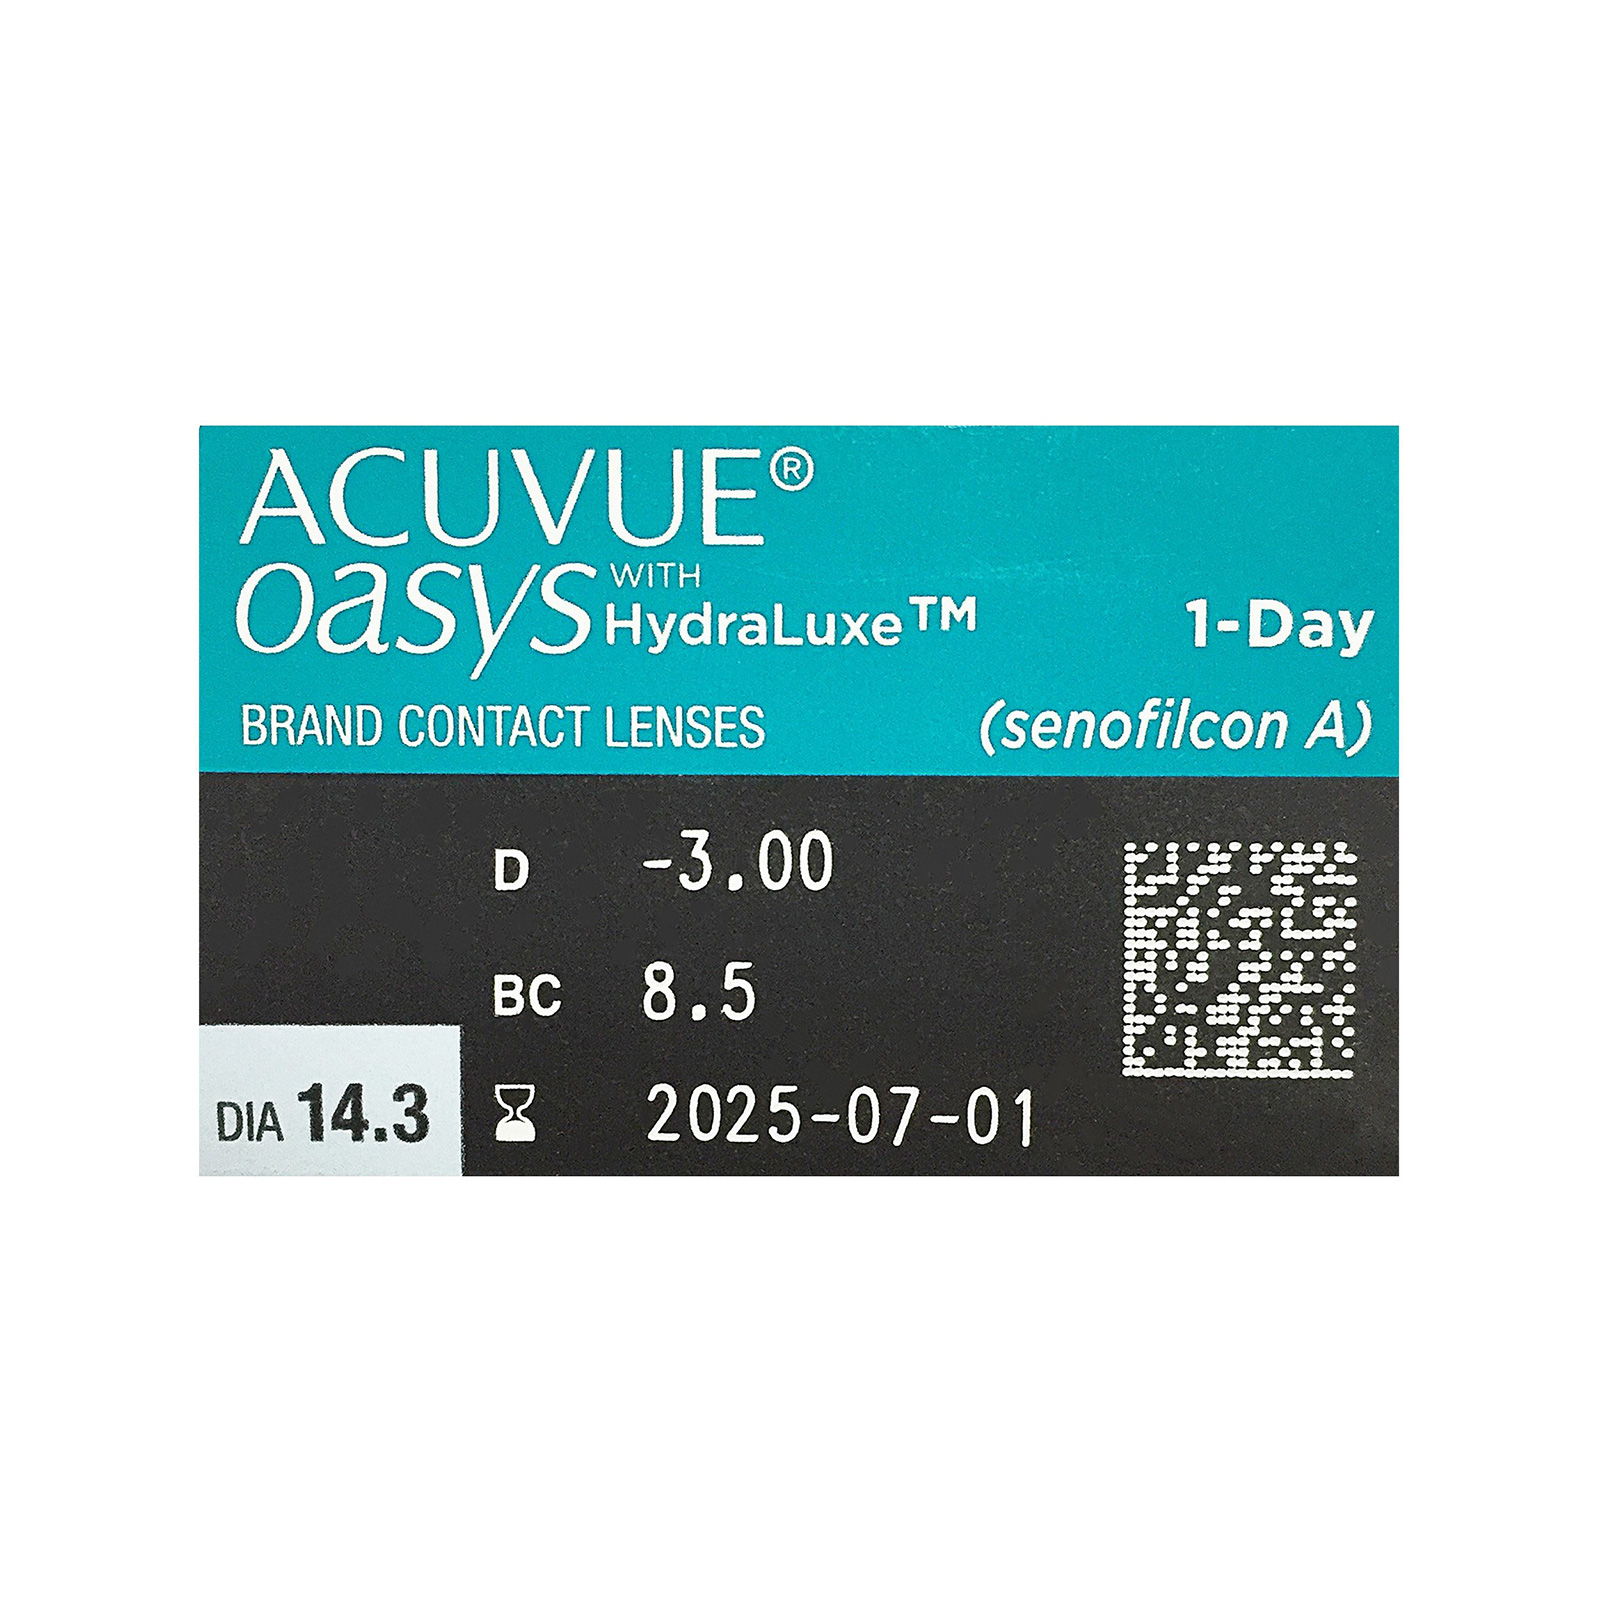 Acuvue Oasys 1-Day With HydraLuxe